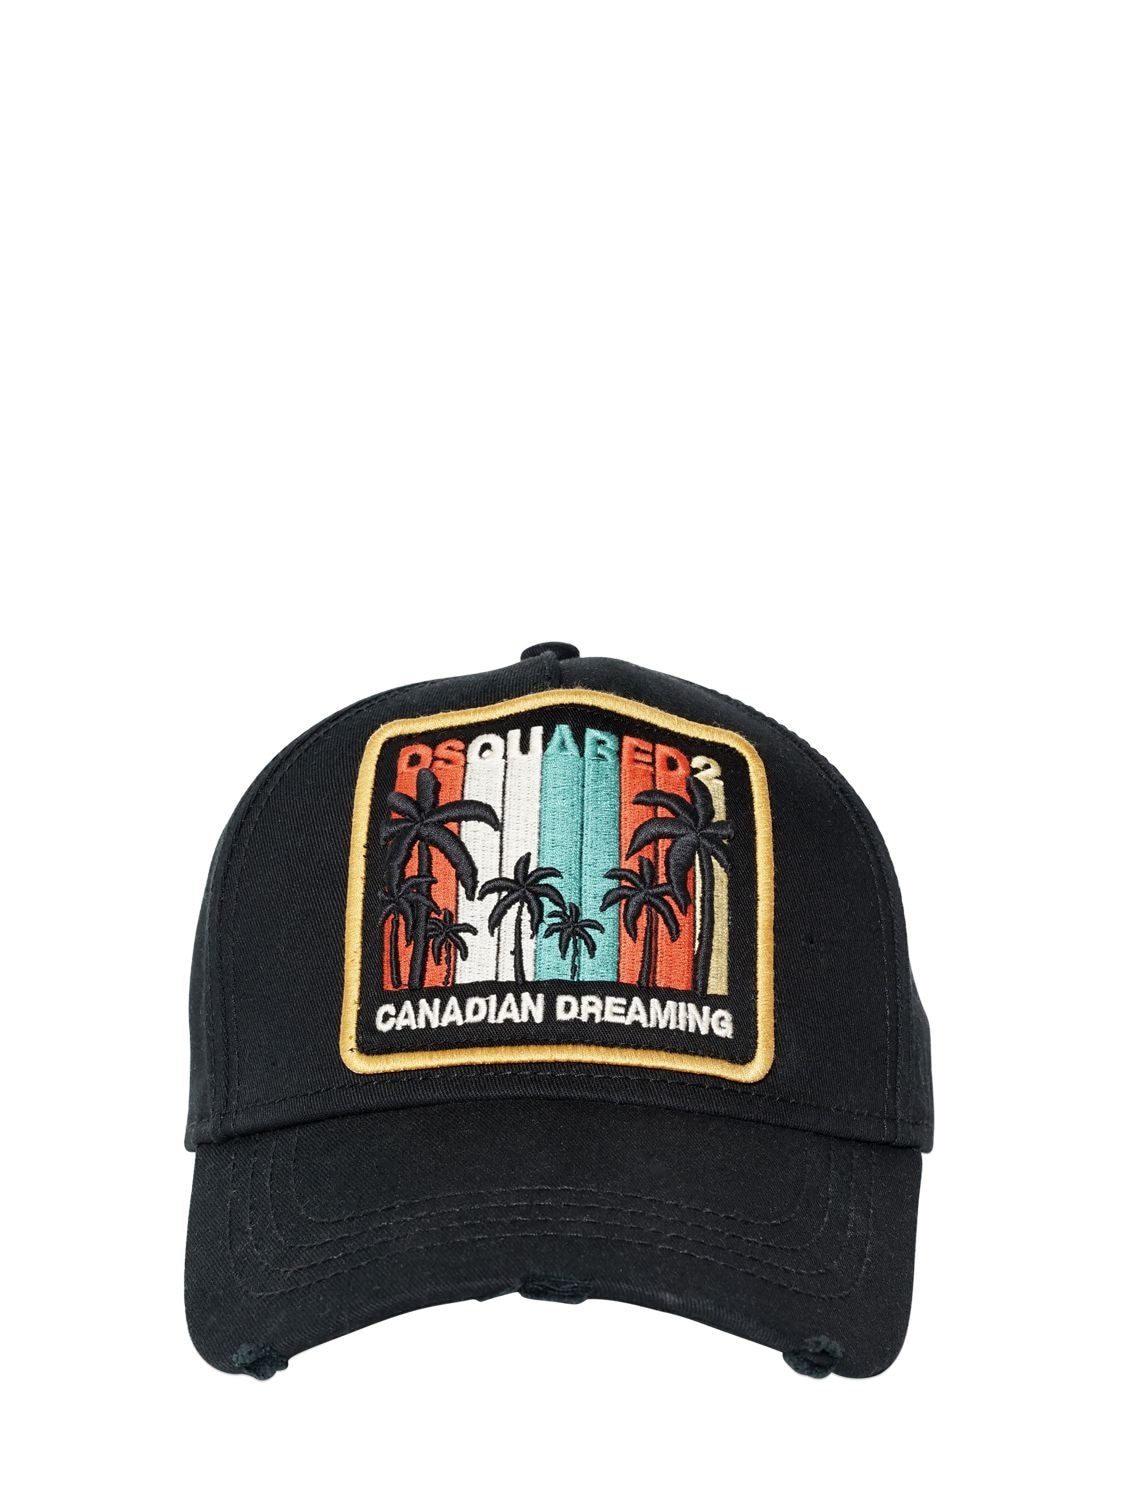 dsquared2 canadian dreaming